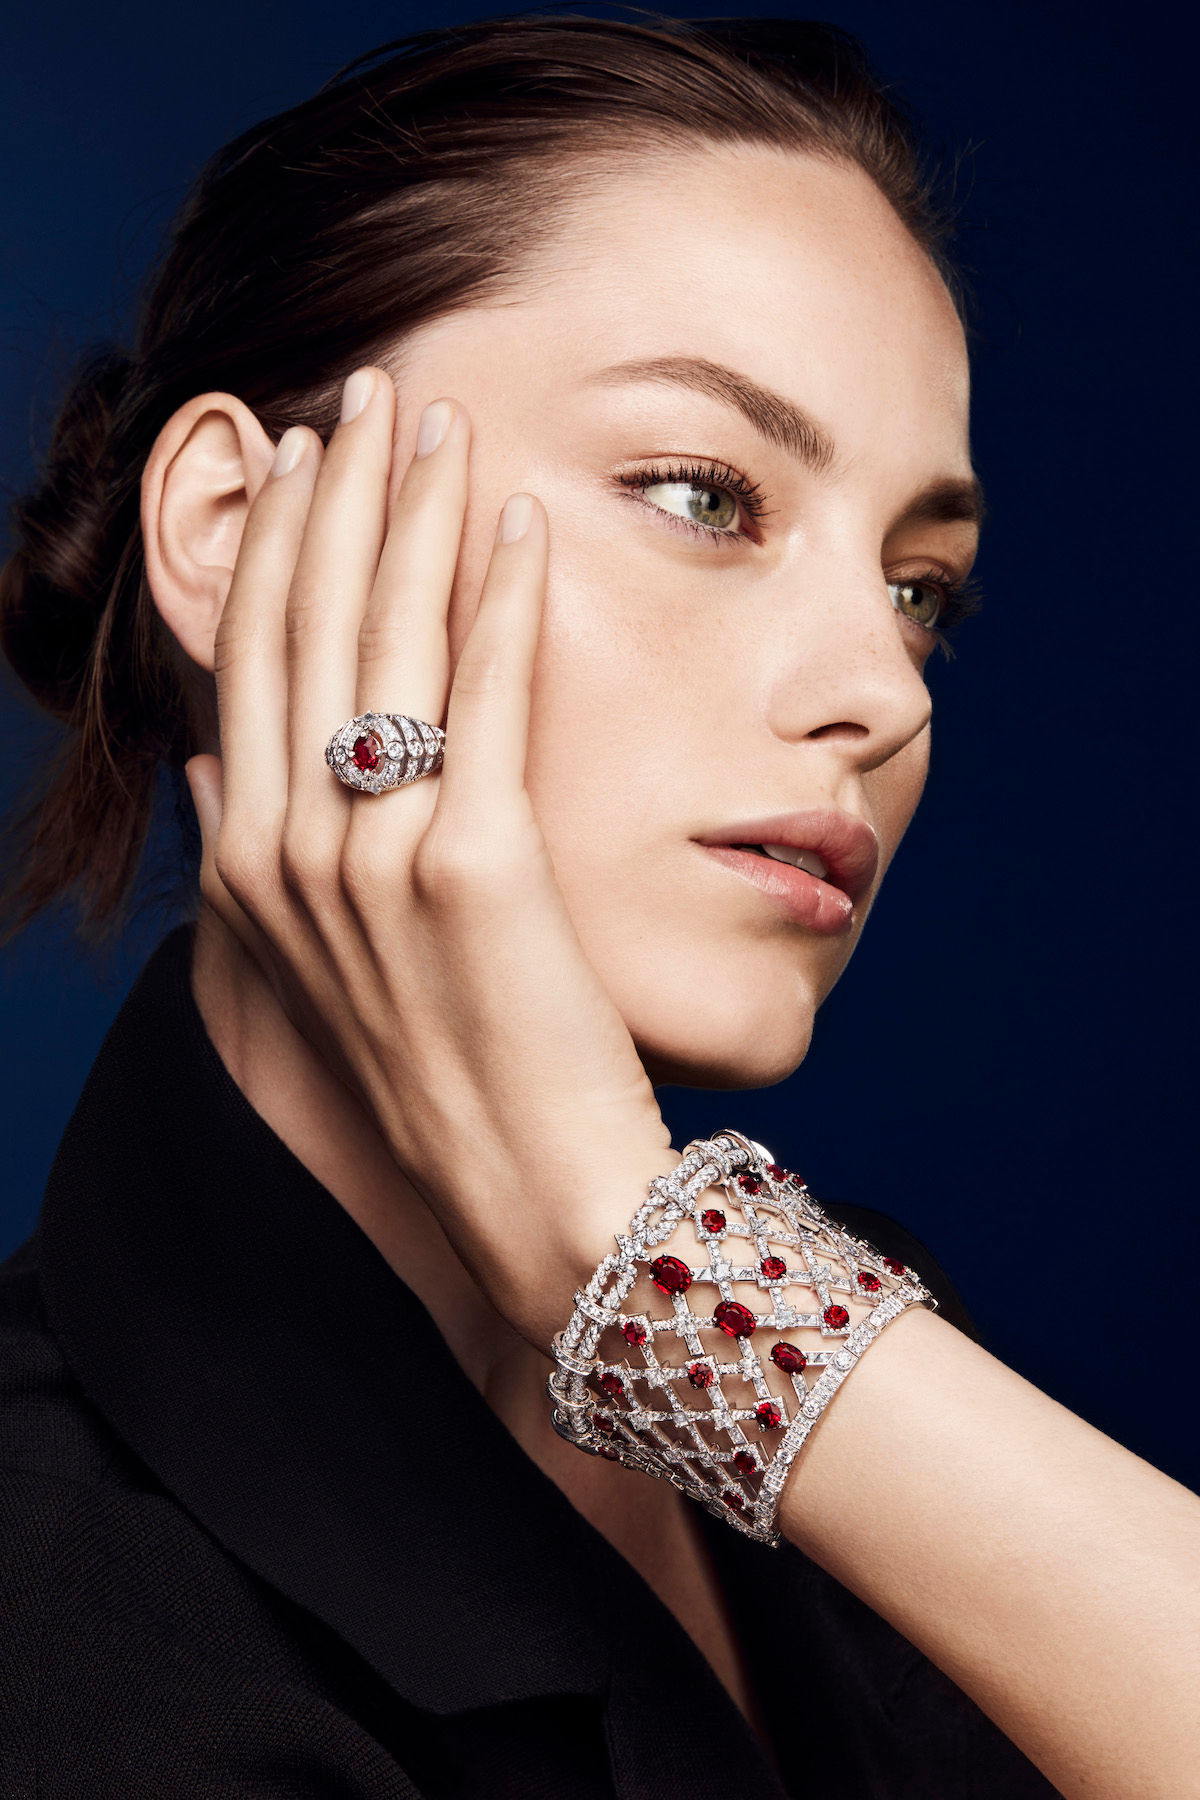 Louis Vuitton Celebrated Women in Their Latest High Jewellery Collection